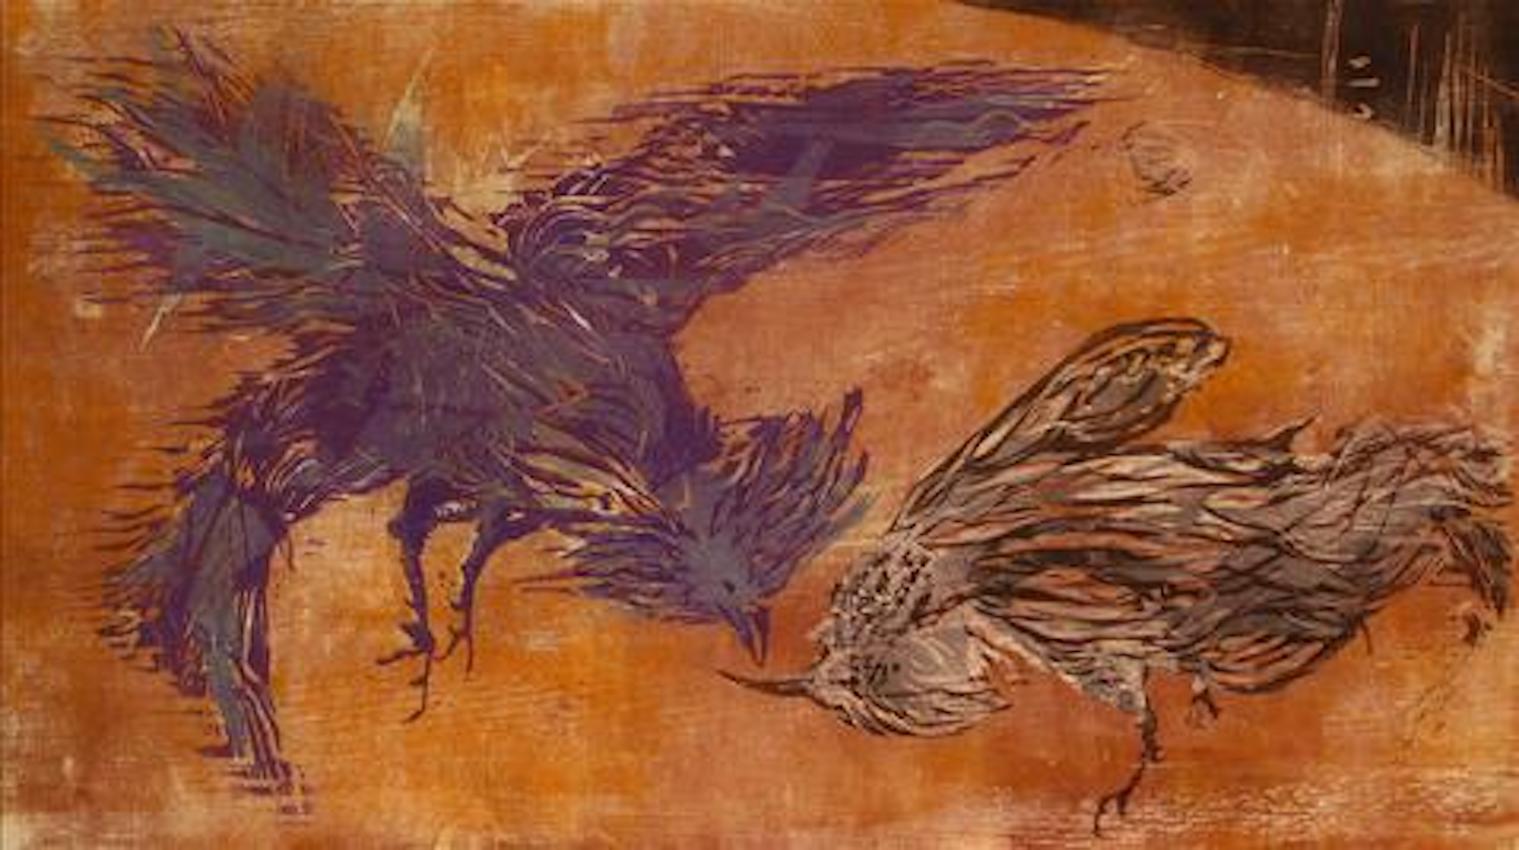 "The Cock Fight" 1963 Woodcut in Burnt Orange and Maroon